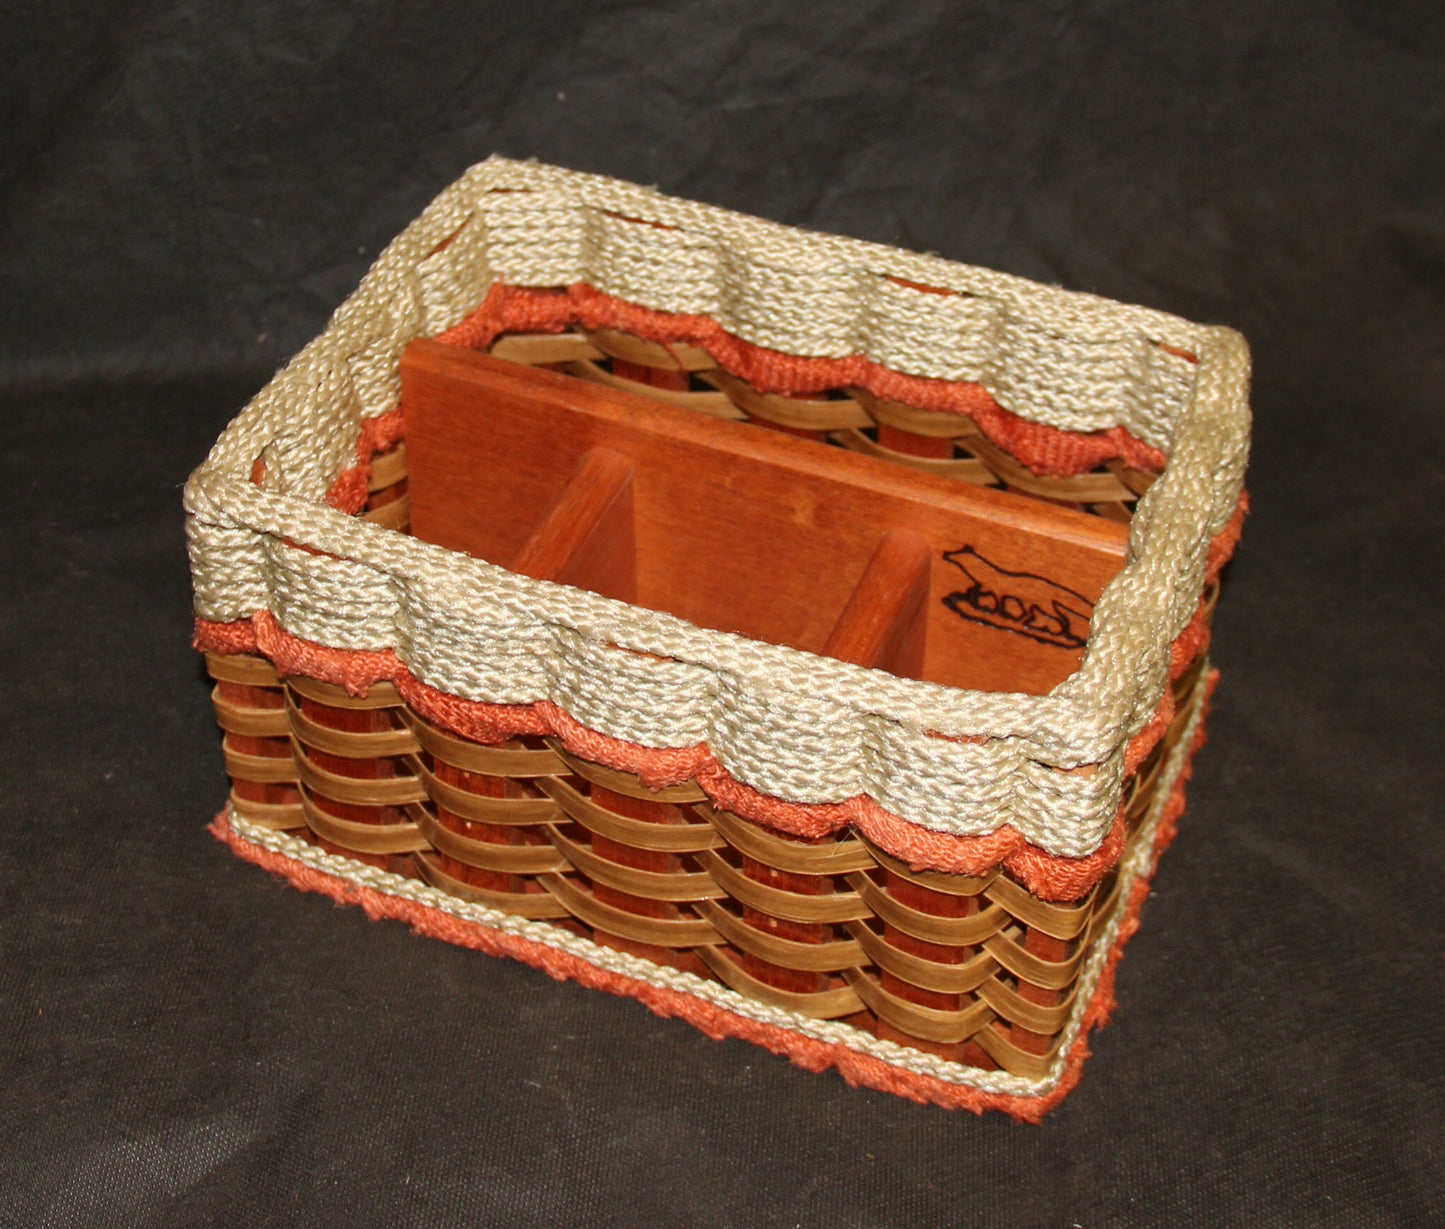 Silverware Basket--Shabby Chic Collection